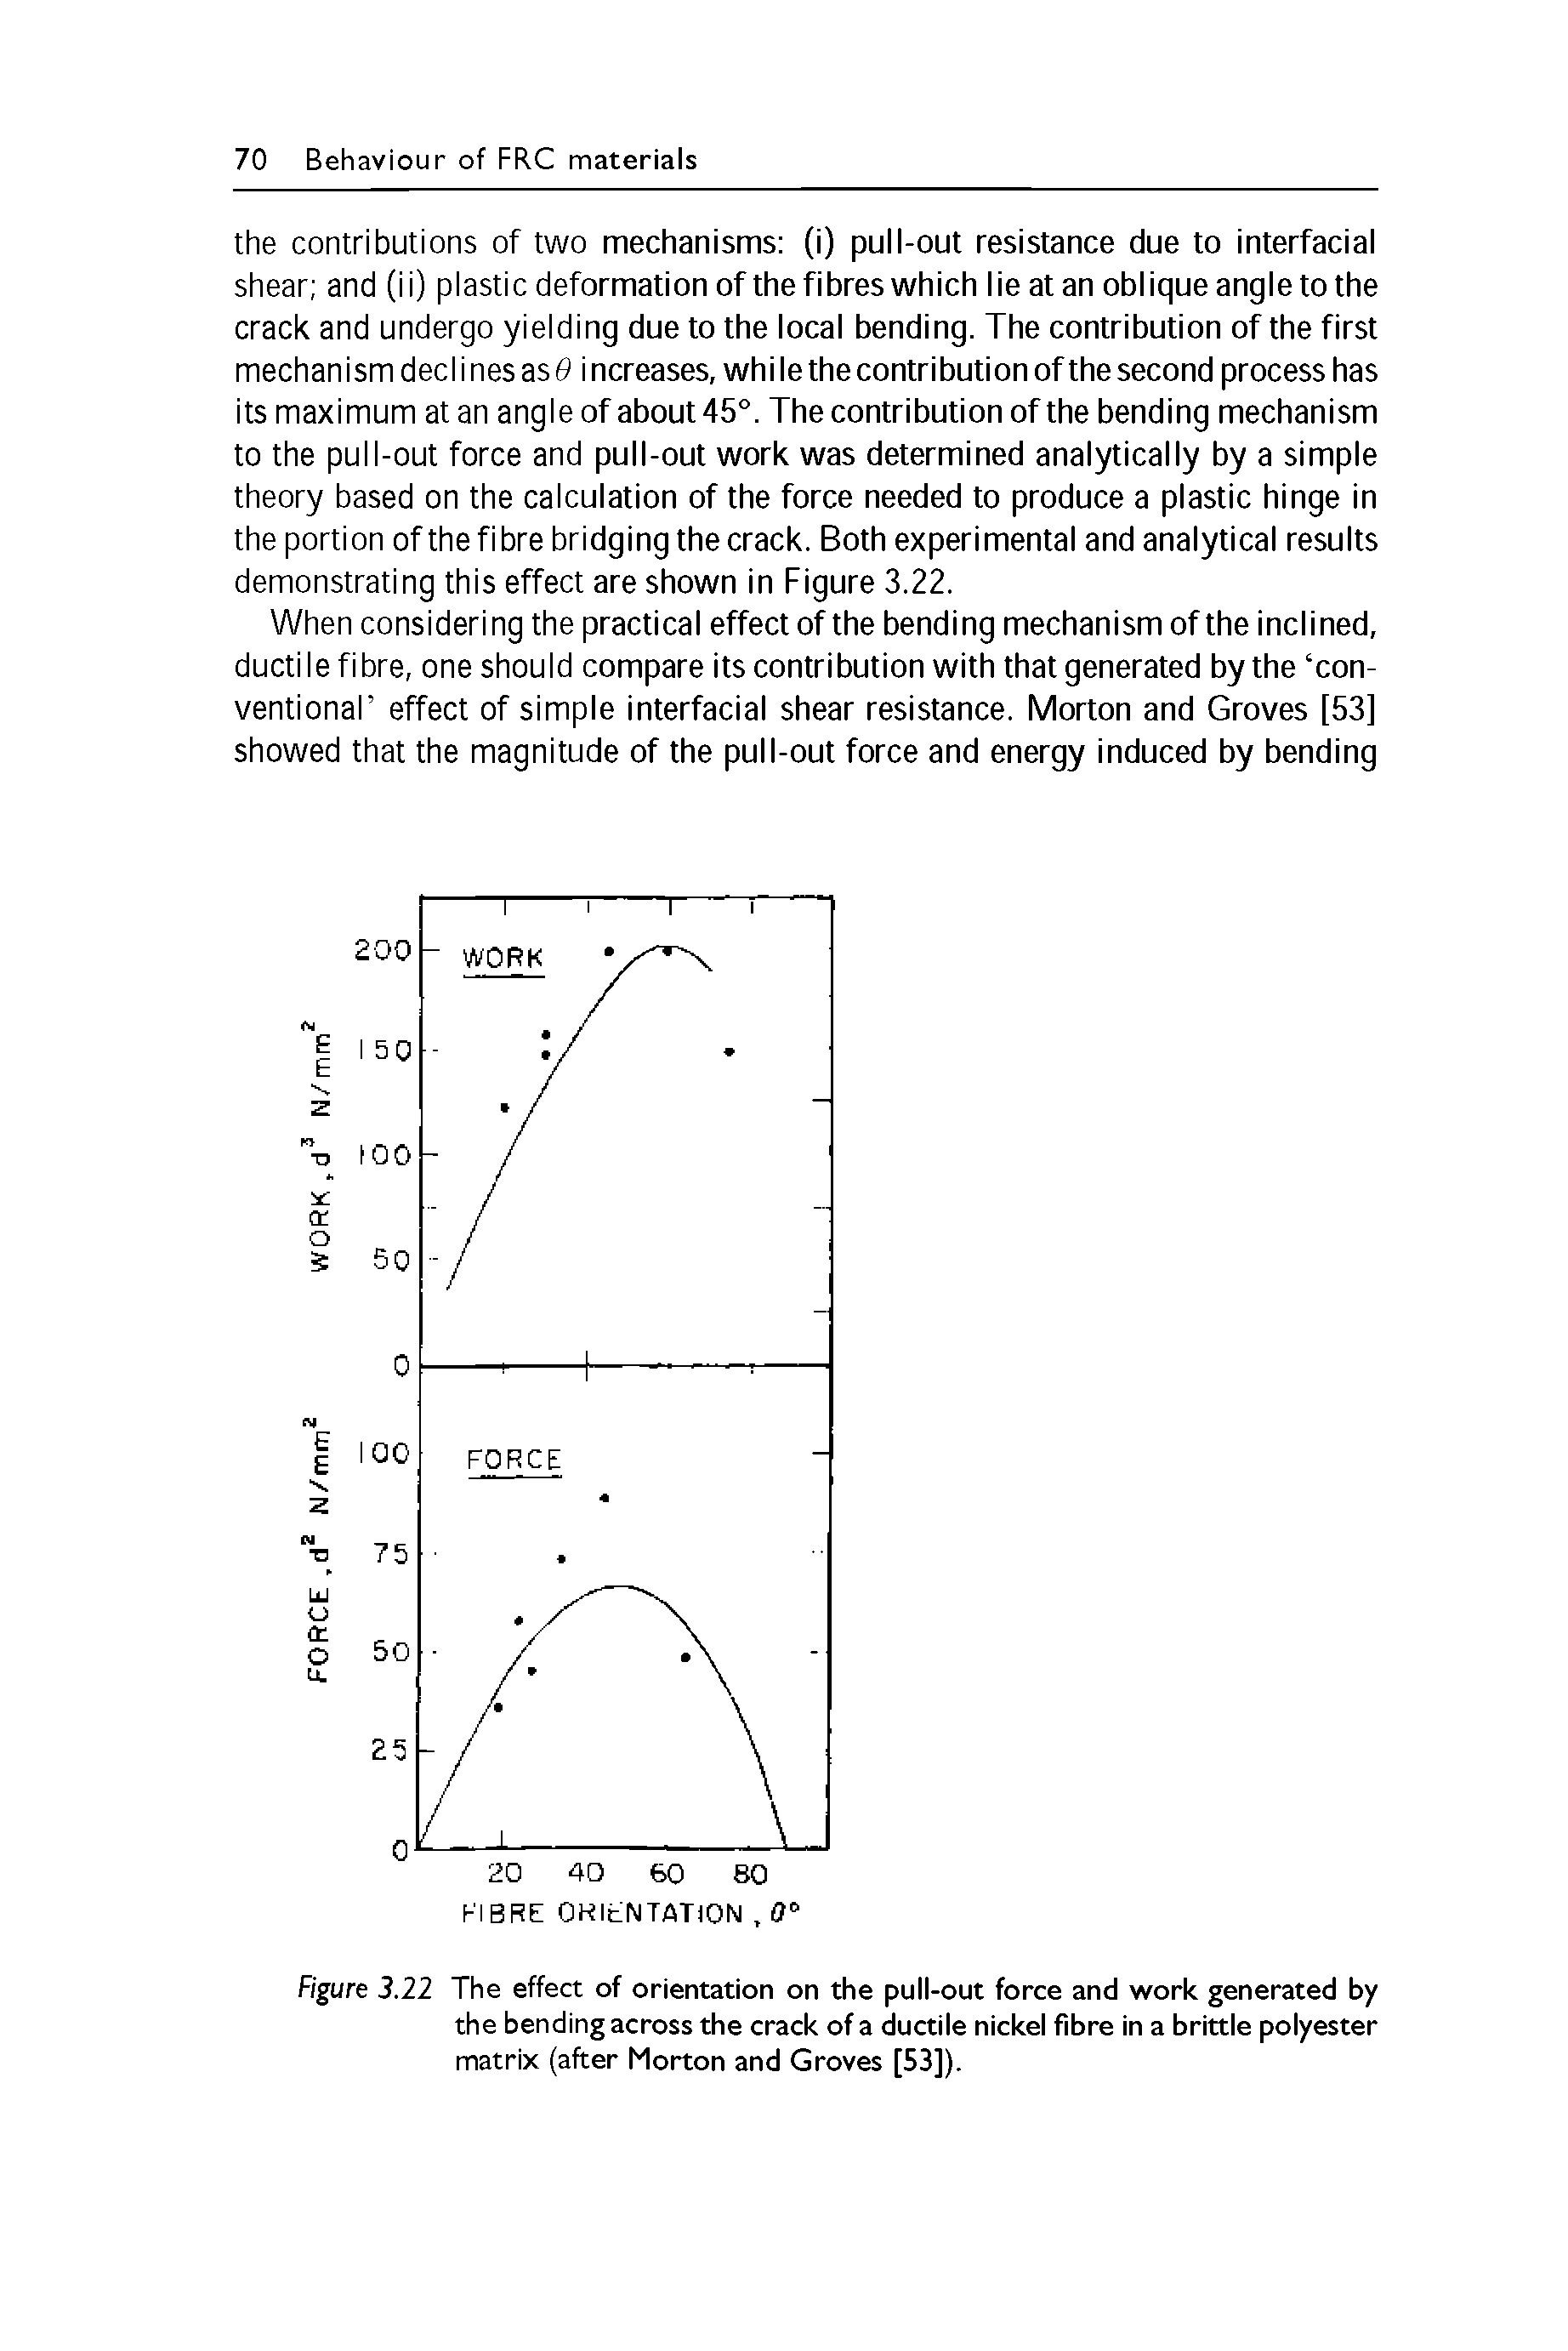 Figure 3.22 The effect of orientation on the pull-out force and work generated by the bending across the crack of a ductile nickel fibre in a brittle polyester matrix (after Morton and Groves [53]).